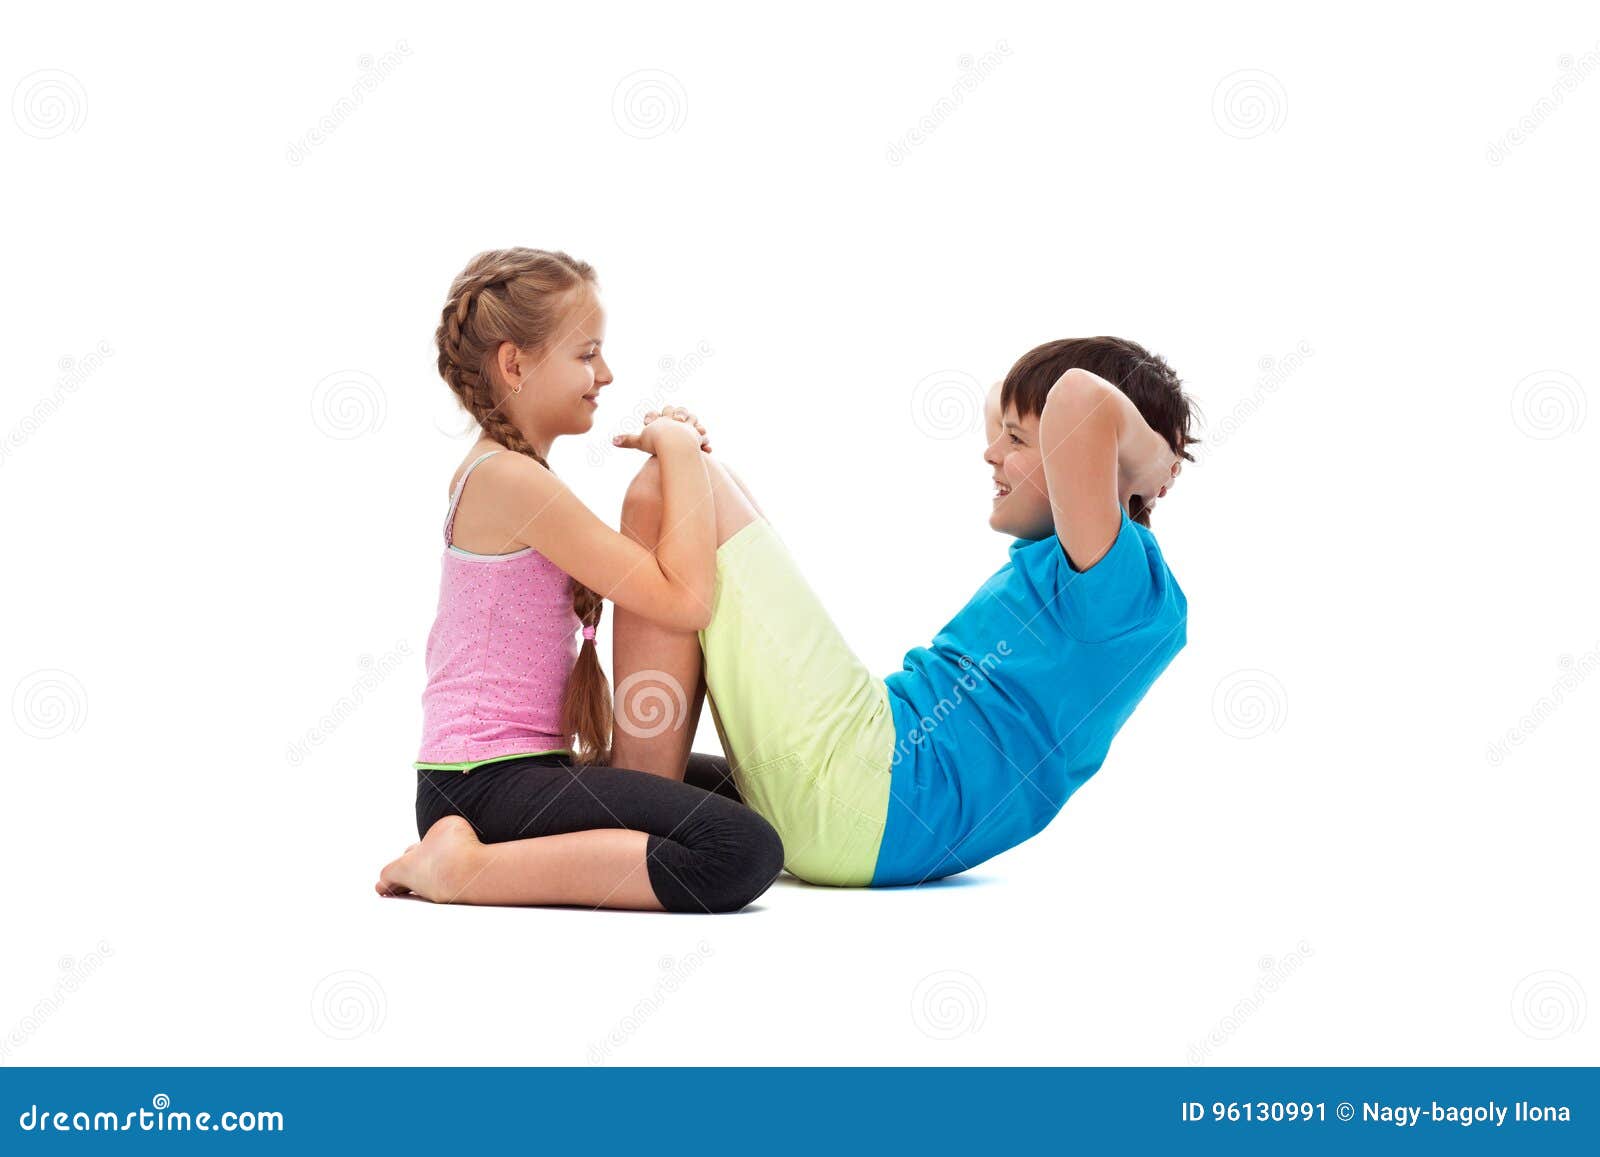 Young Kids Doing Abs Exercises Together Helping Each Other